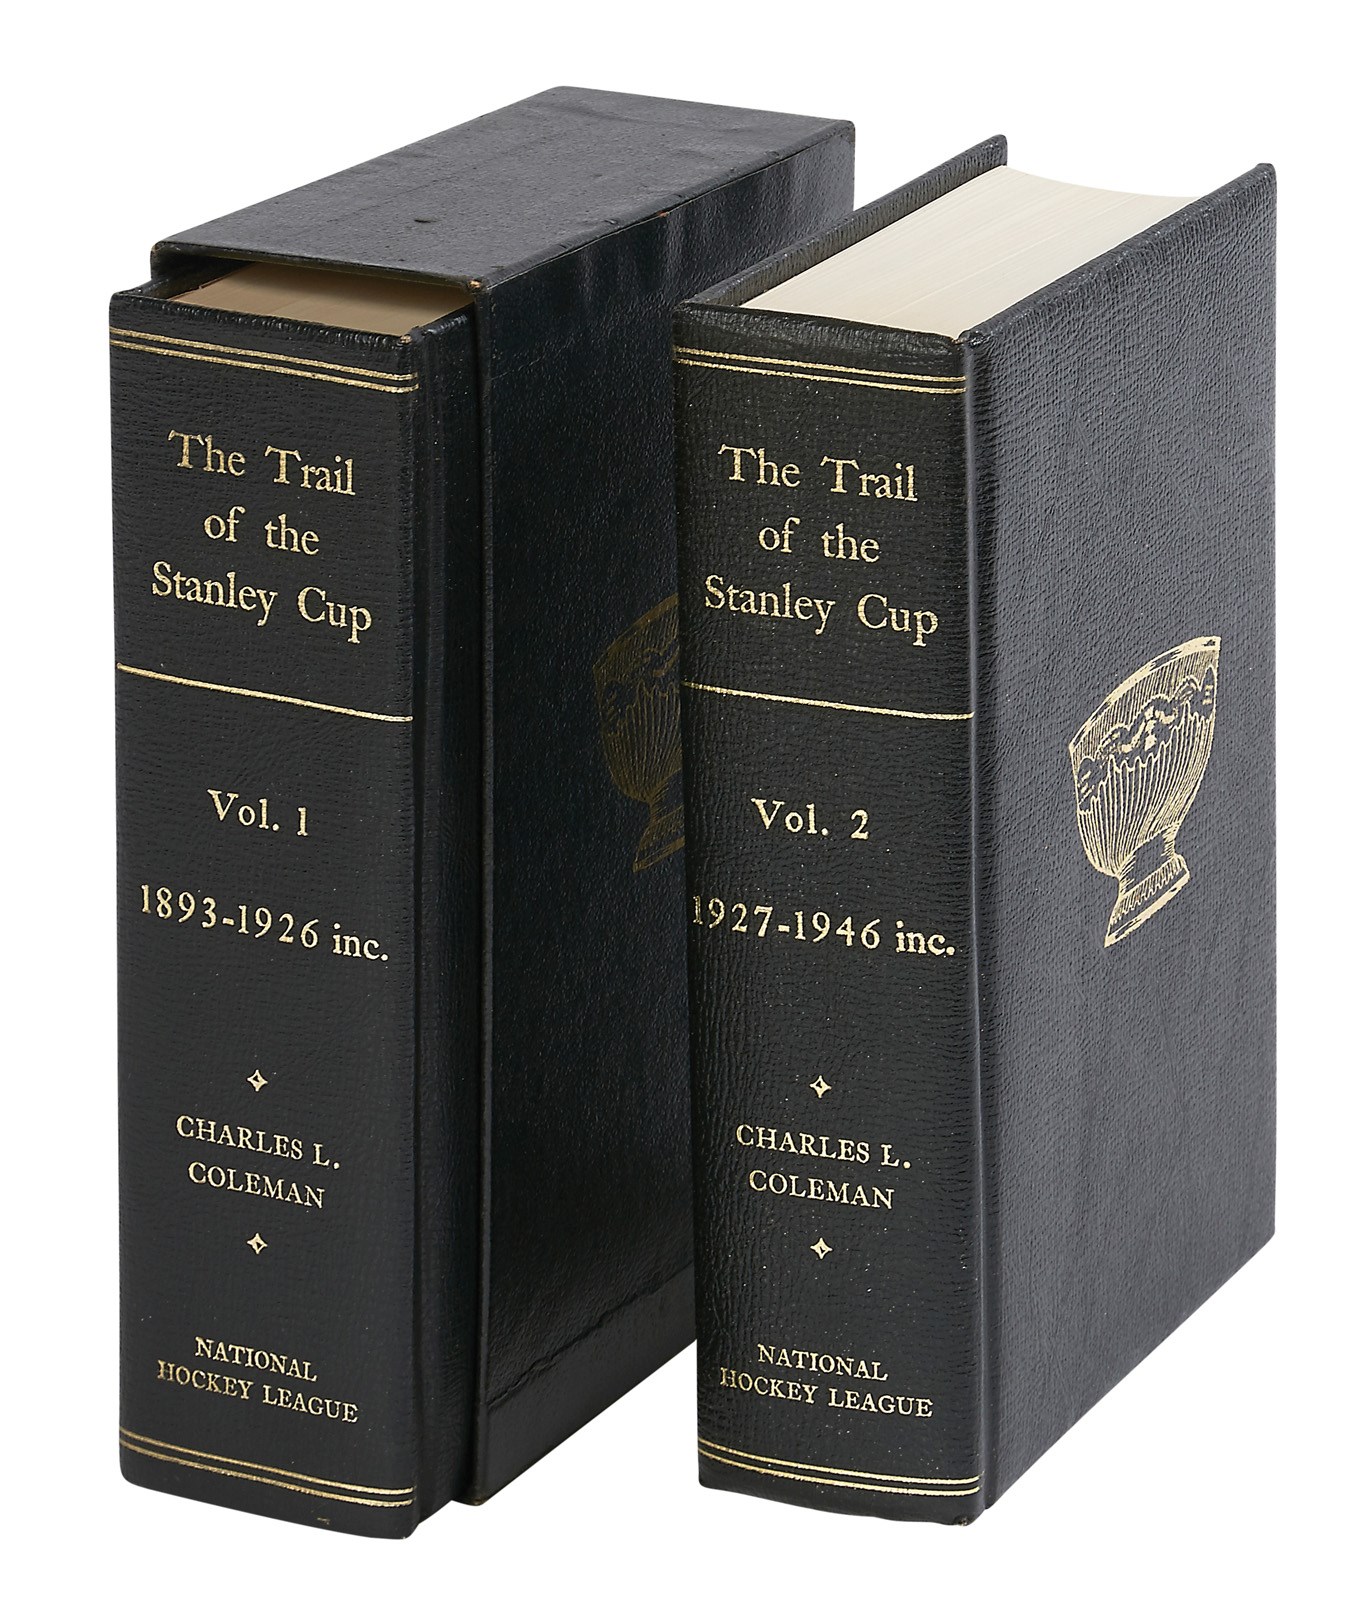 The Craig Patrick Hockey Collection - "The Trail of The Stanley Cup" Volumes 1 and 2  Presented to Craig Patrick